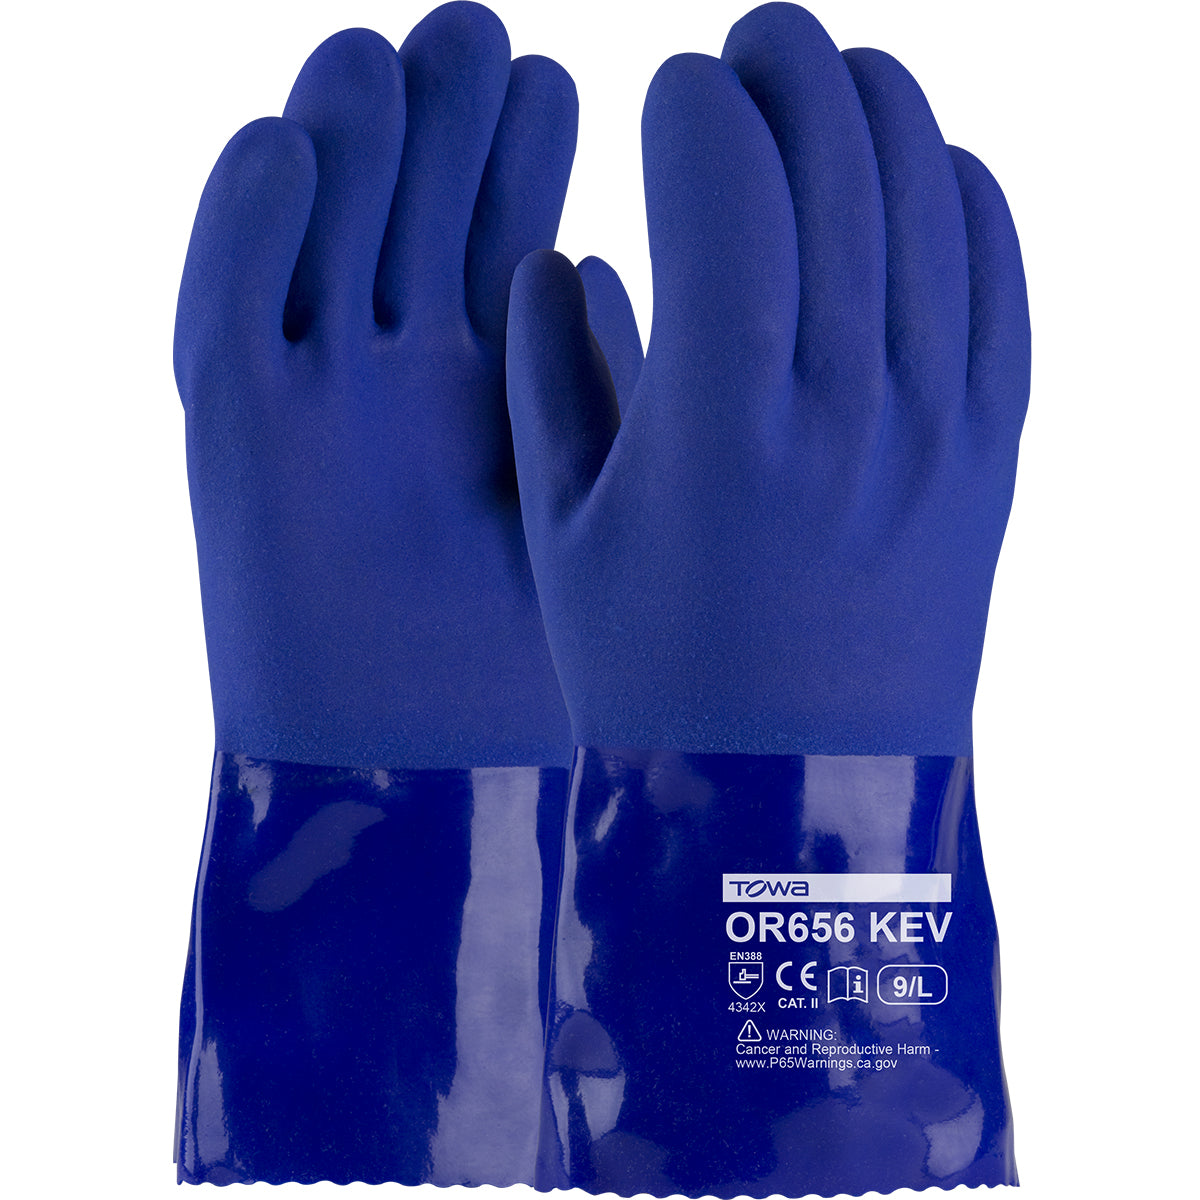 PIP 58-8658K/L Oil Resistant PVC Glove with DuPont Kevlar Liner and Rough Grip